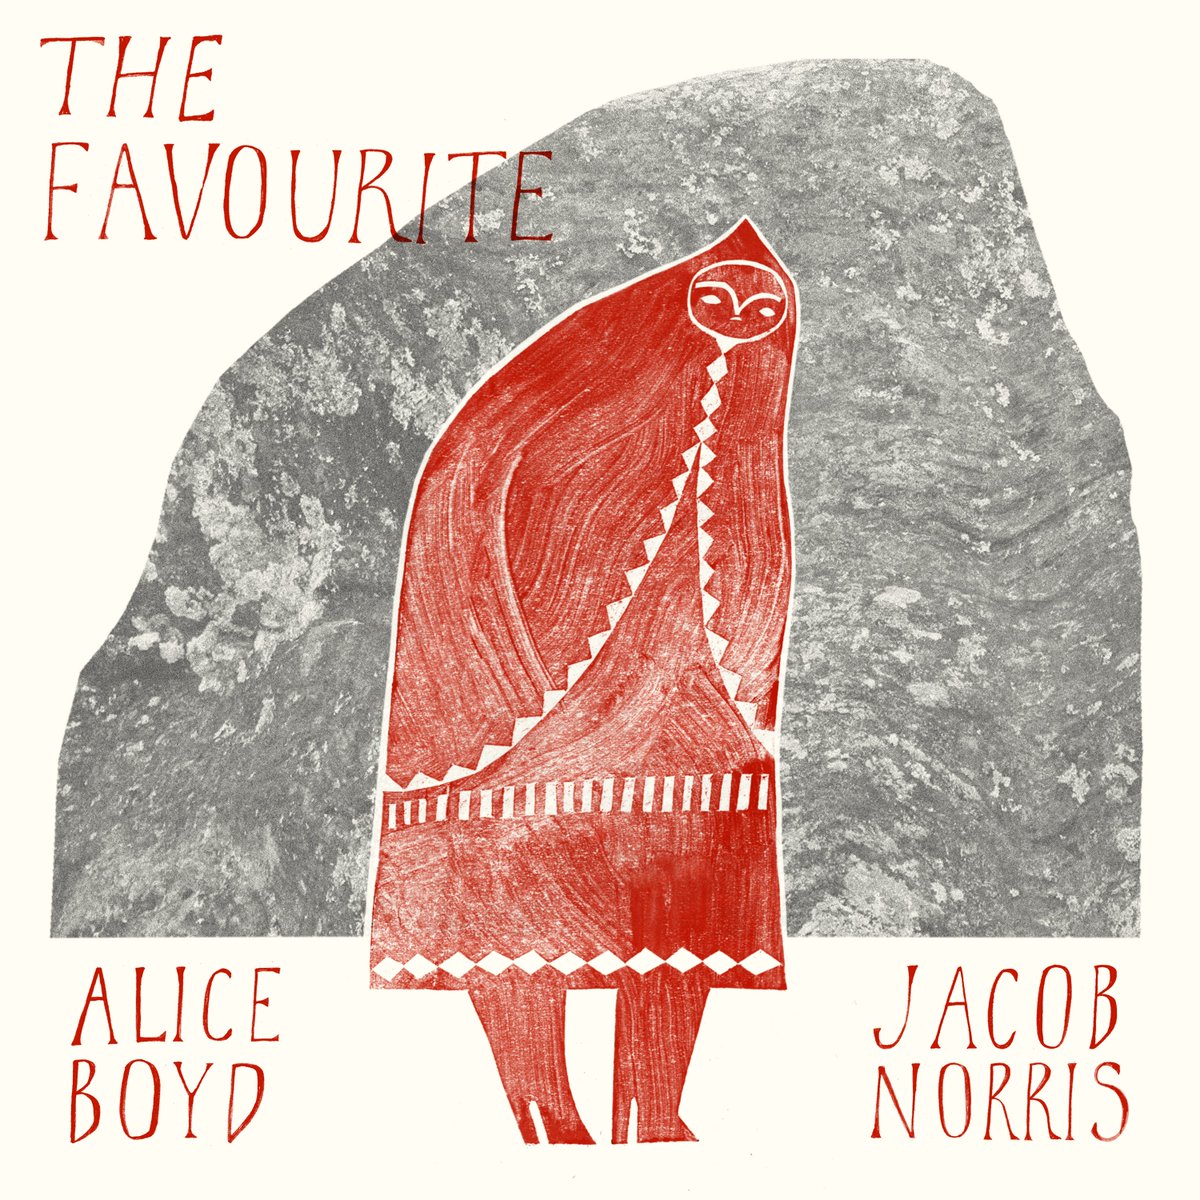 'Regret & longing sit side by side, so too conviction & doubt, as well as a steadfast belief in both the misery & wonder of any human connection' @aliceboydmusic teams up with Jacob Norris for new single, 'The Favourite'. varioussmallflames.co.uk/2024/04/11/ali…